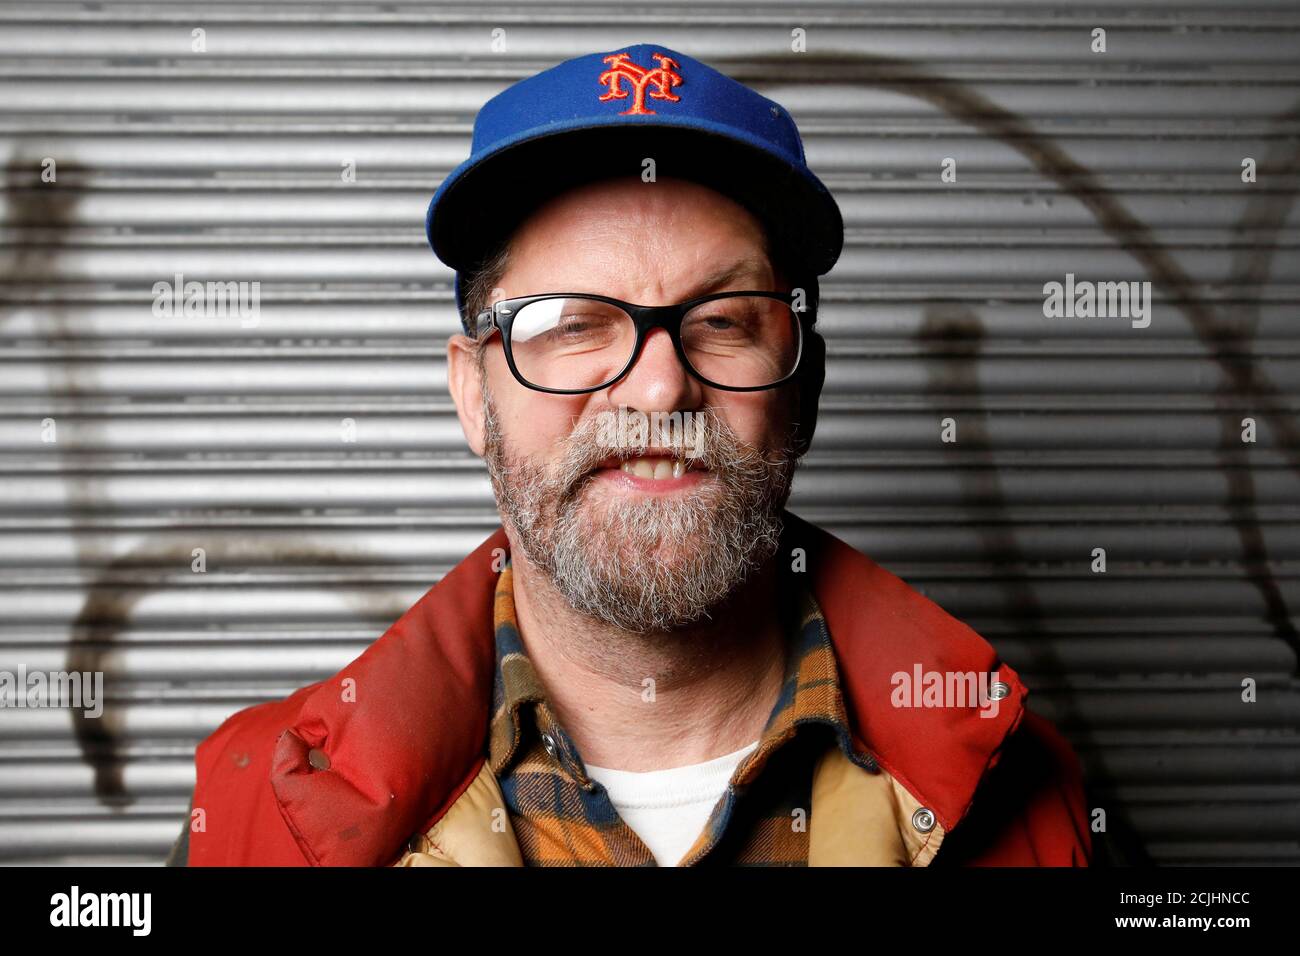 superstición Proverbio Oponerse a Co-founder of Vice Media and Vice Magazine Gavin McInnes poses for a photo  as he attends the New York screening of the Mike Cernovich film "Hoaxed" in  Manhattan in New York City,